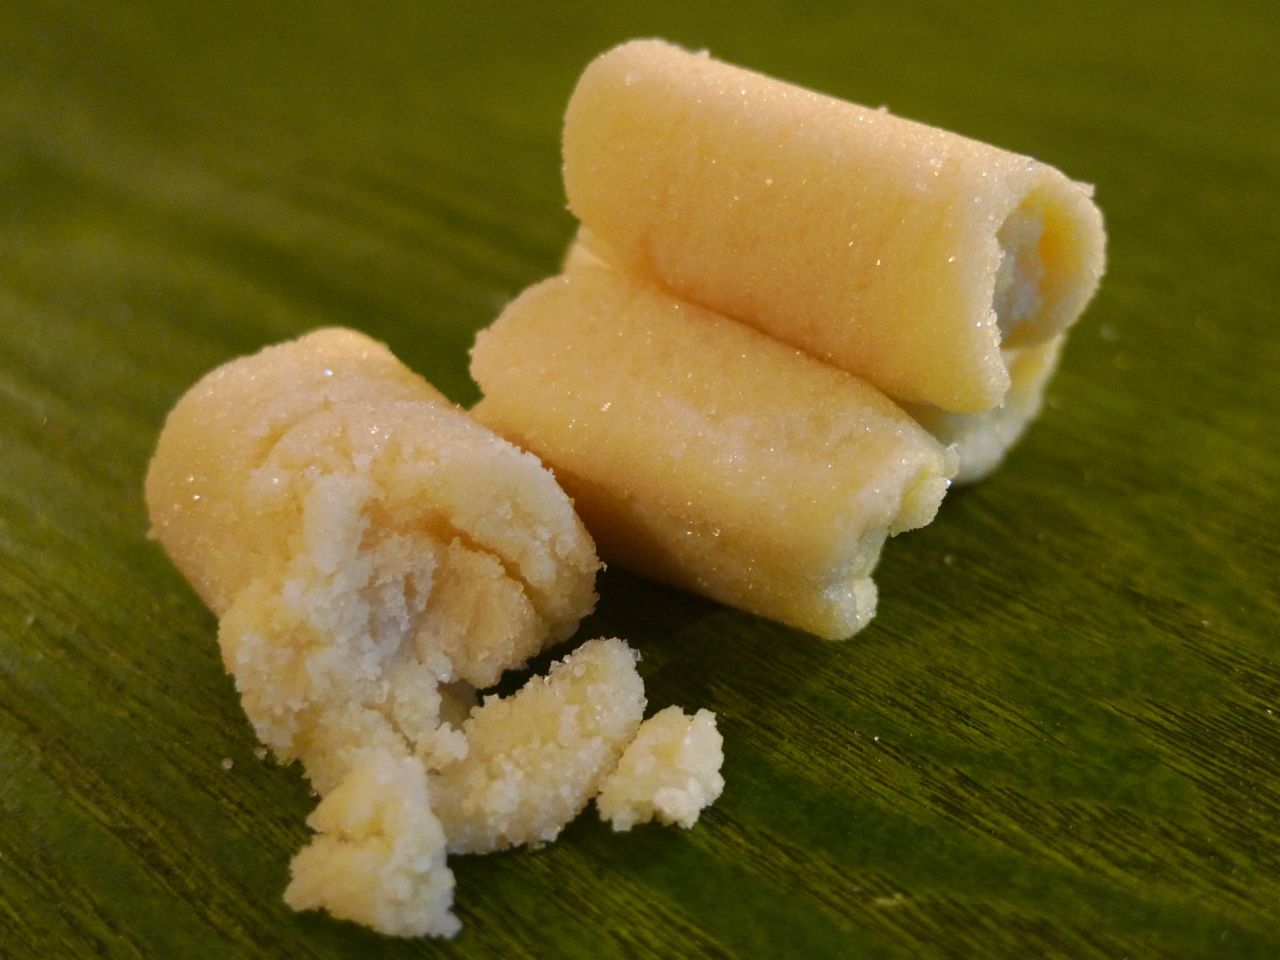 Made from fresh carabao milk and sugar, this sweet confection is stirred until thick and melts in the mouth.